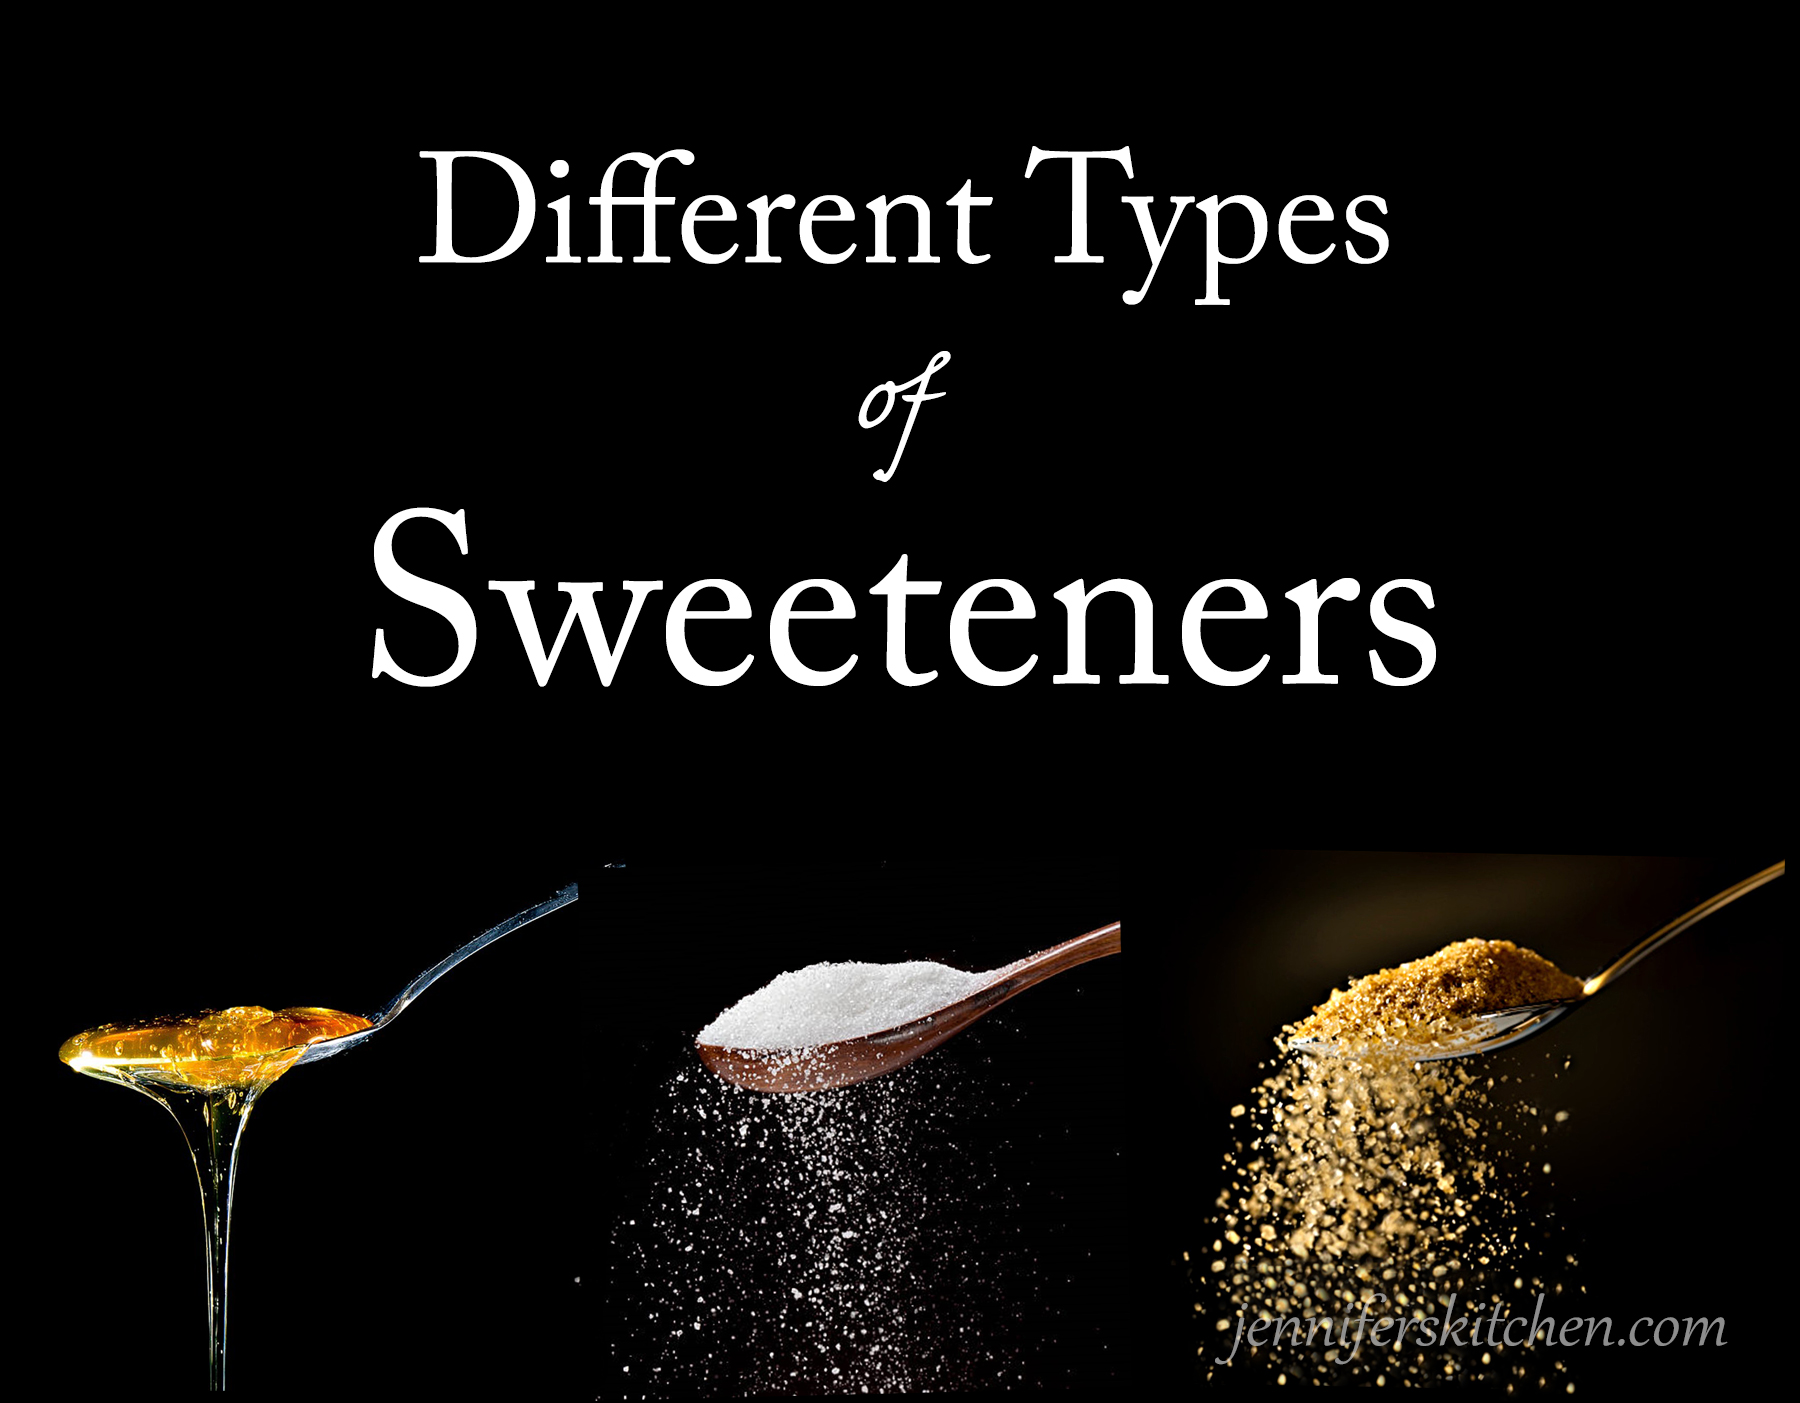 Different Types of Sweeteners